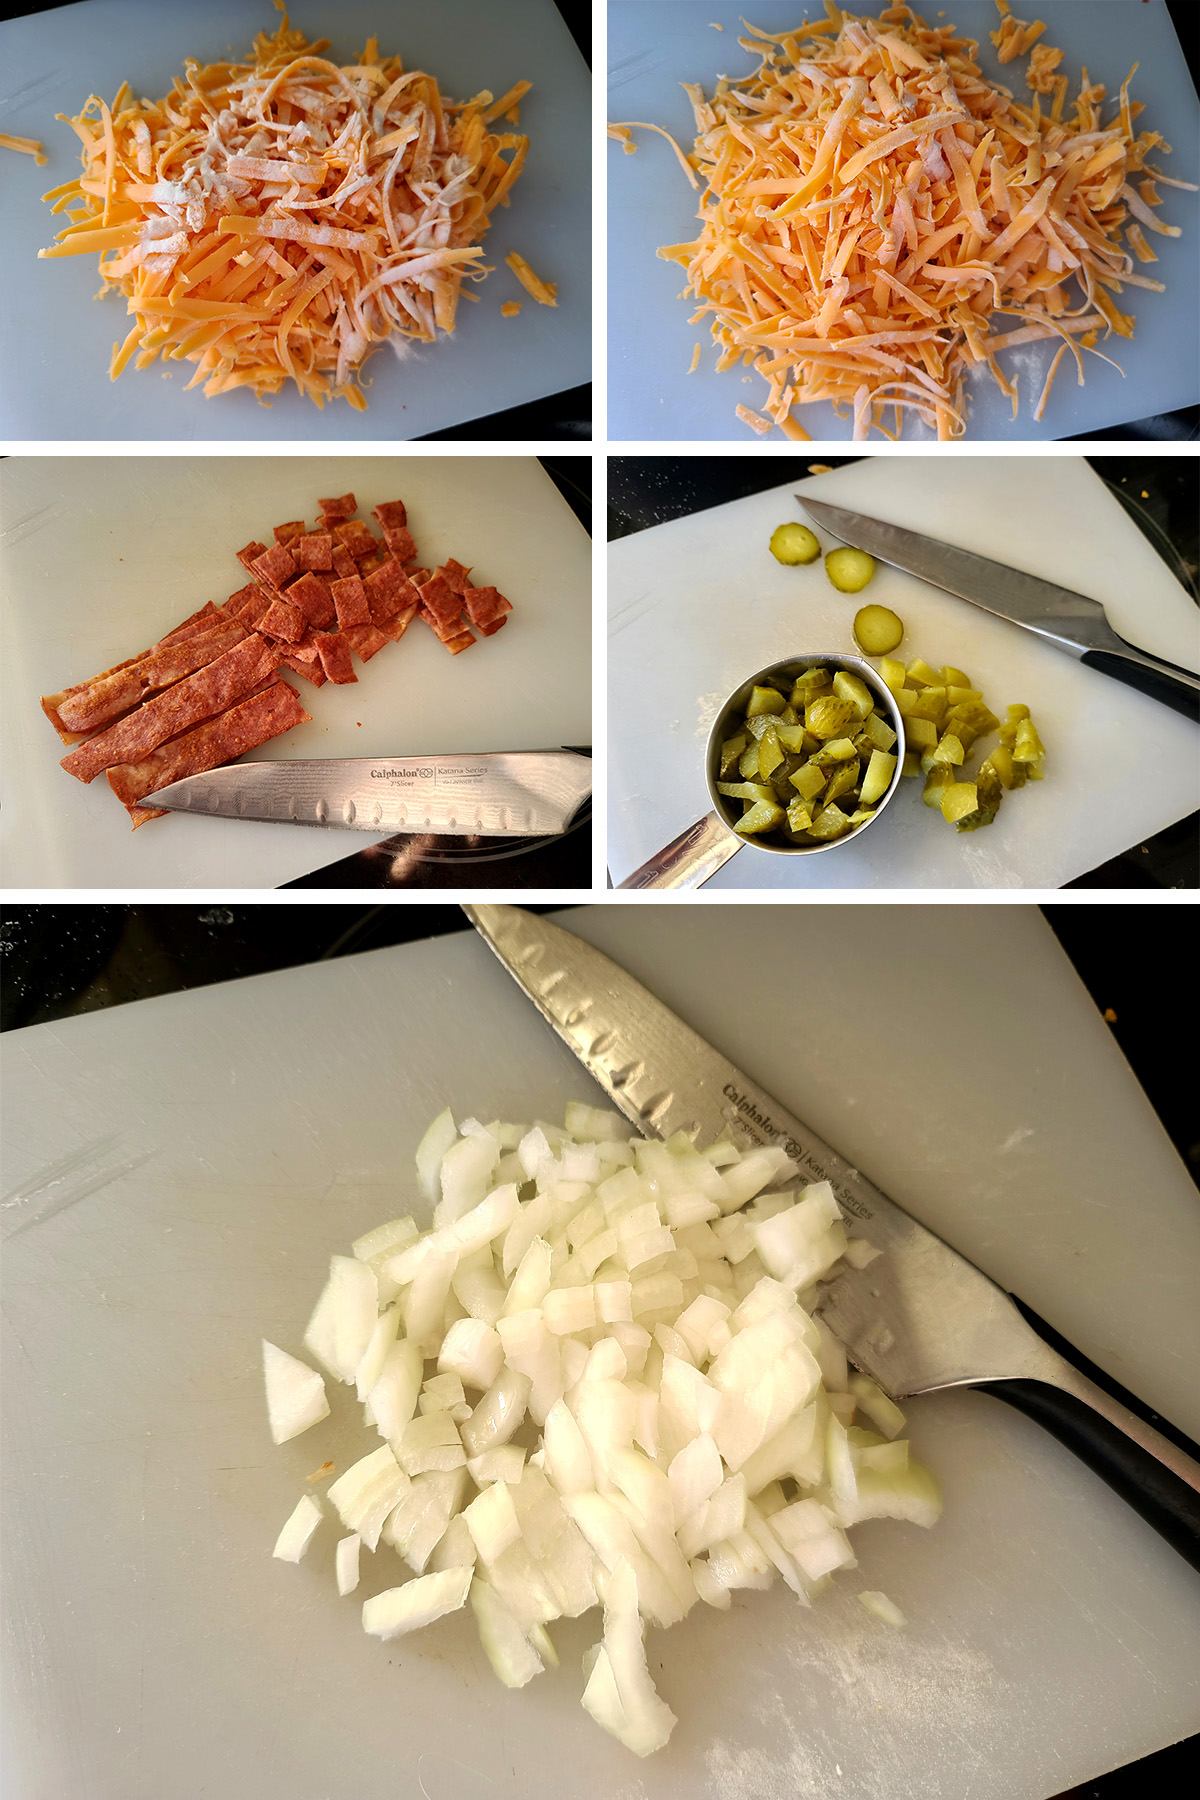 A 5 part image showing the grated cheese being tossed with xanthan gum, and the bacon, pickles, and onions being chopped.